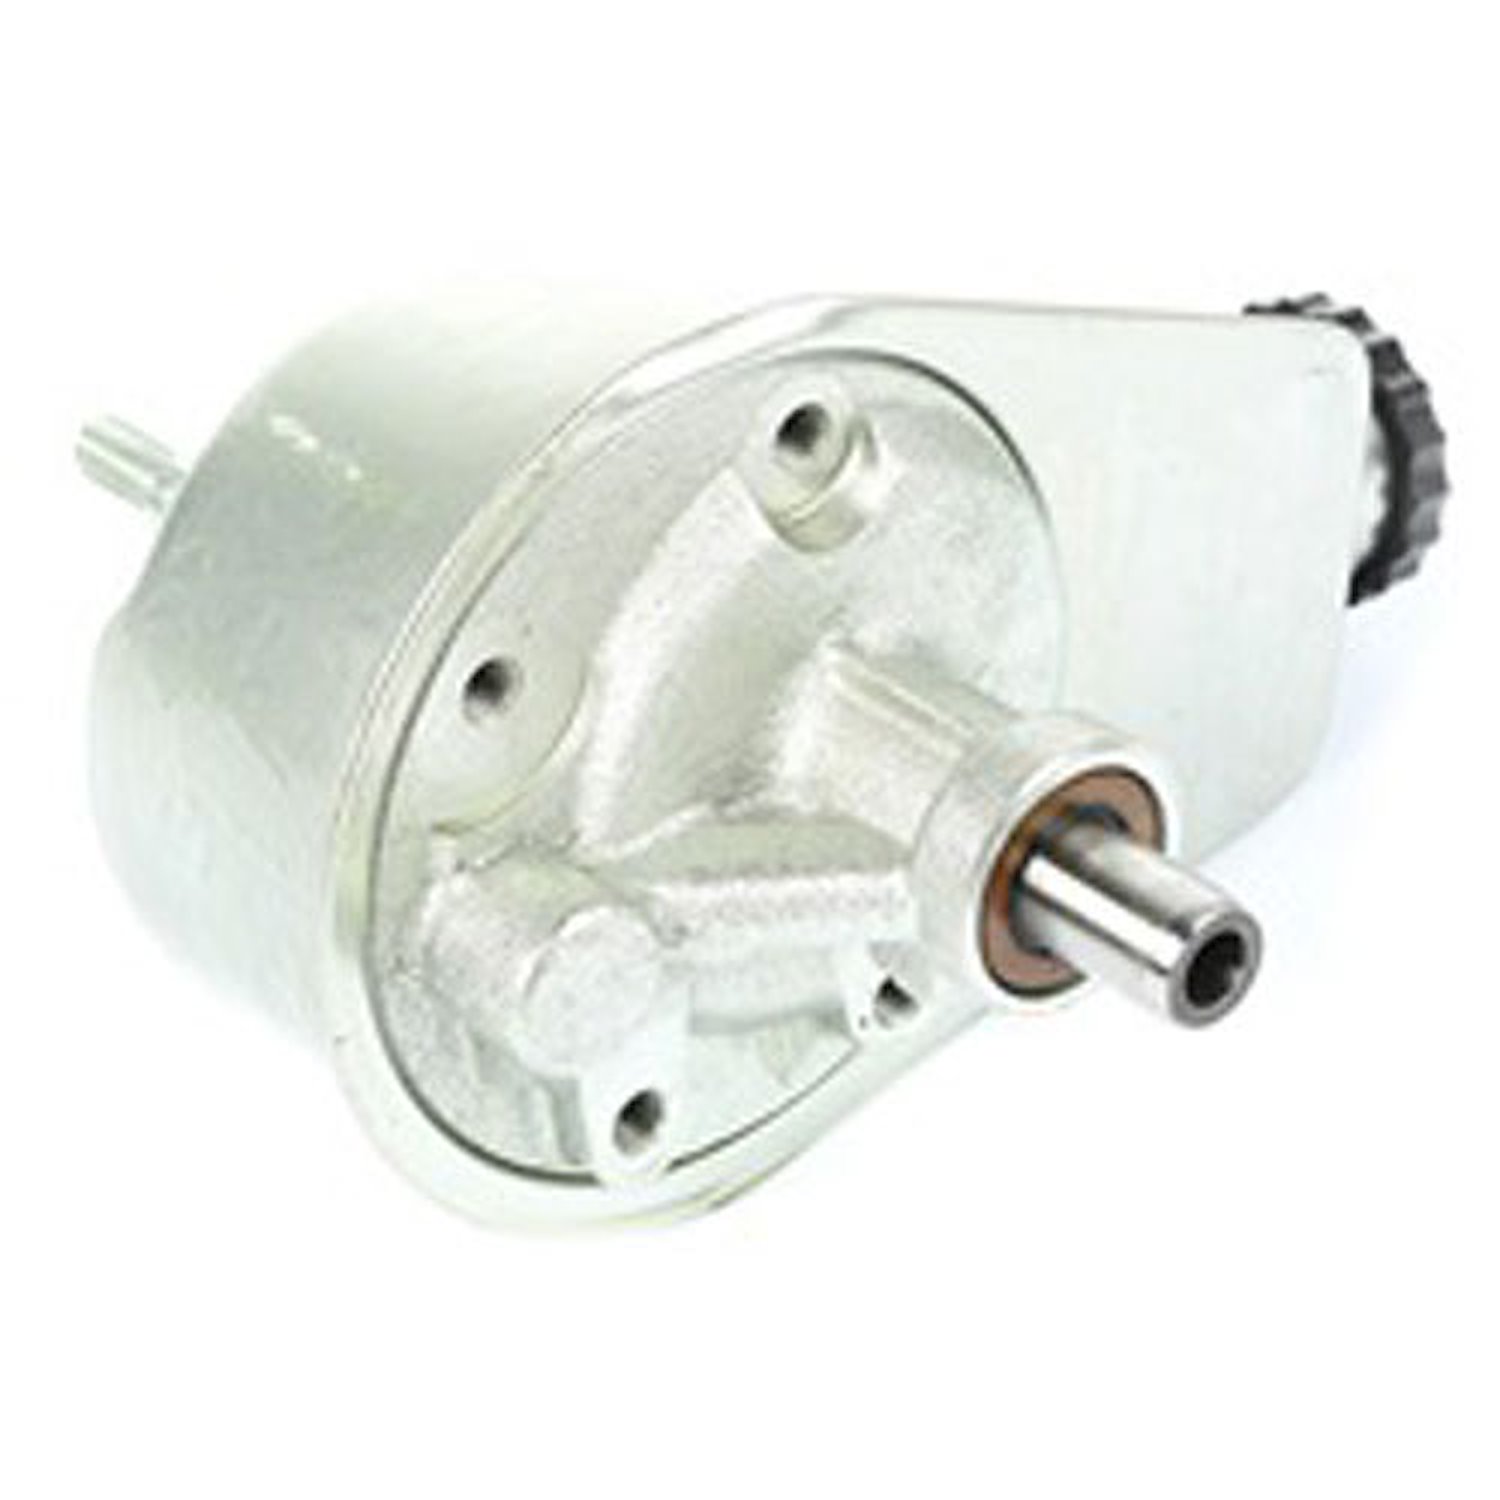 This power steering pump from Omix-ADA fits 83-86 Jeep CJ models and 87-90 Wranglers with a 2.5L or 4.2L engine.